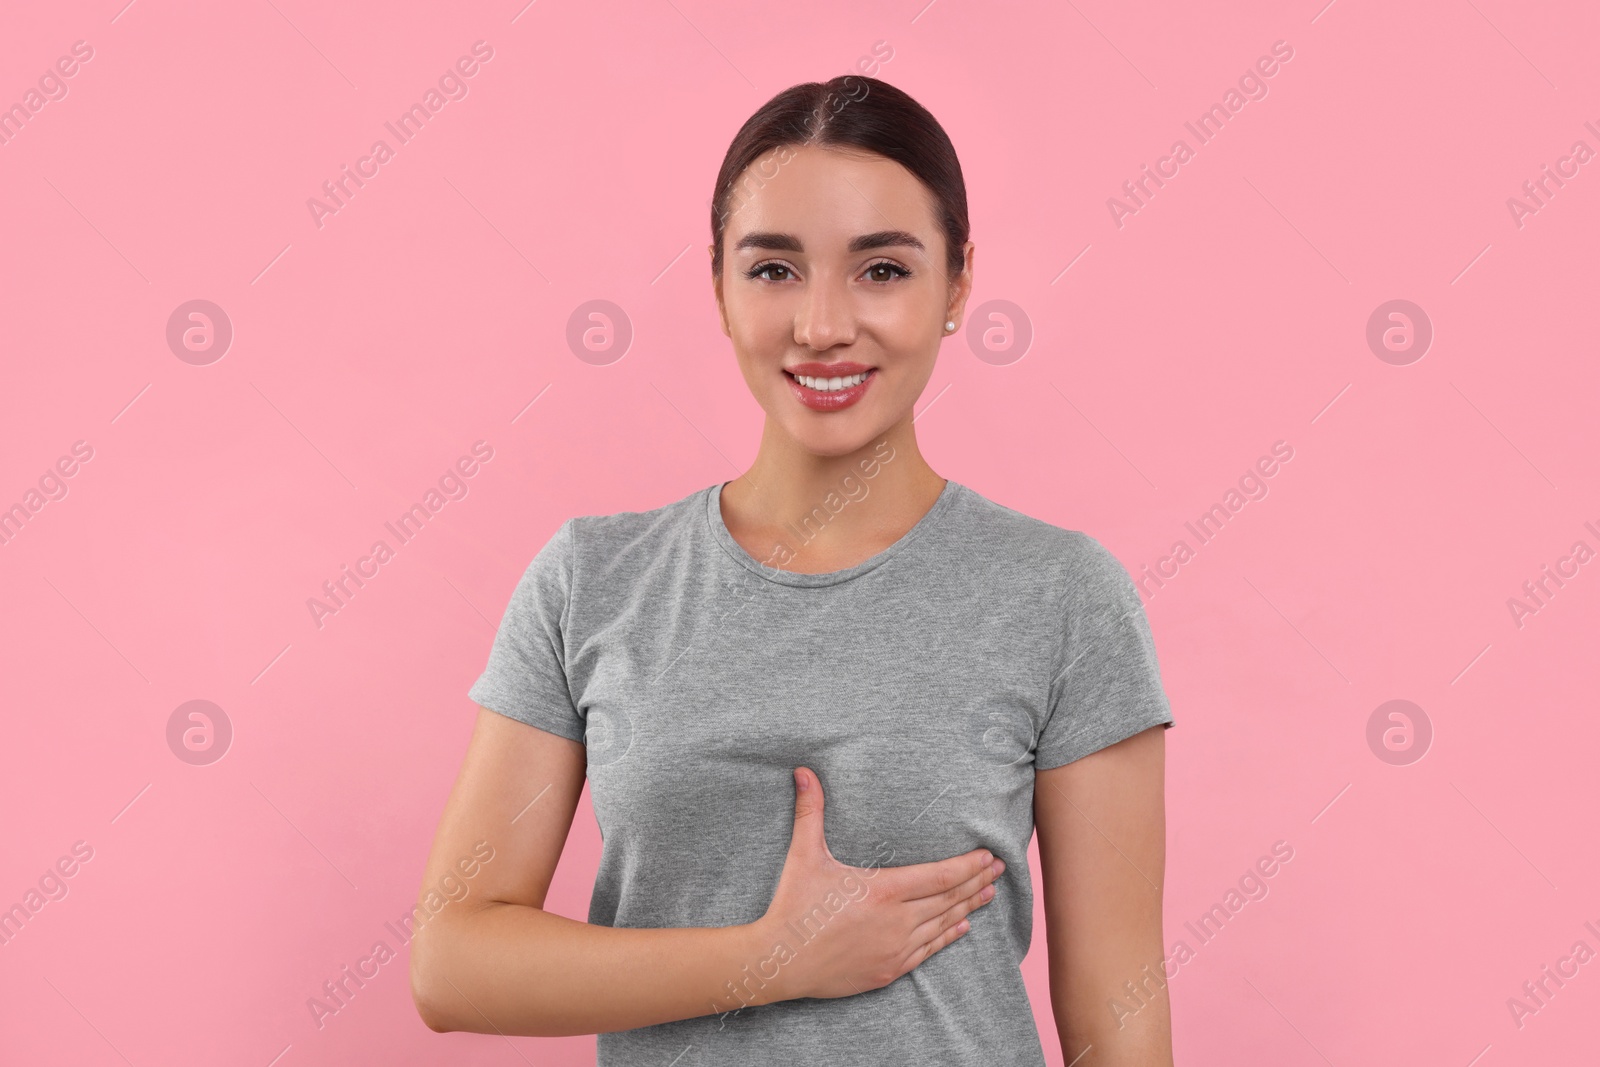 Photo of Beautiful young woman doing breast self-examination on pink background